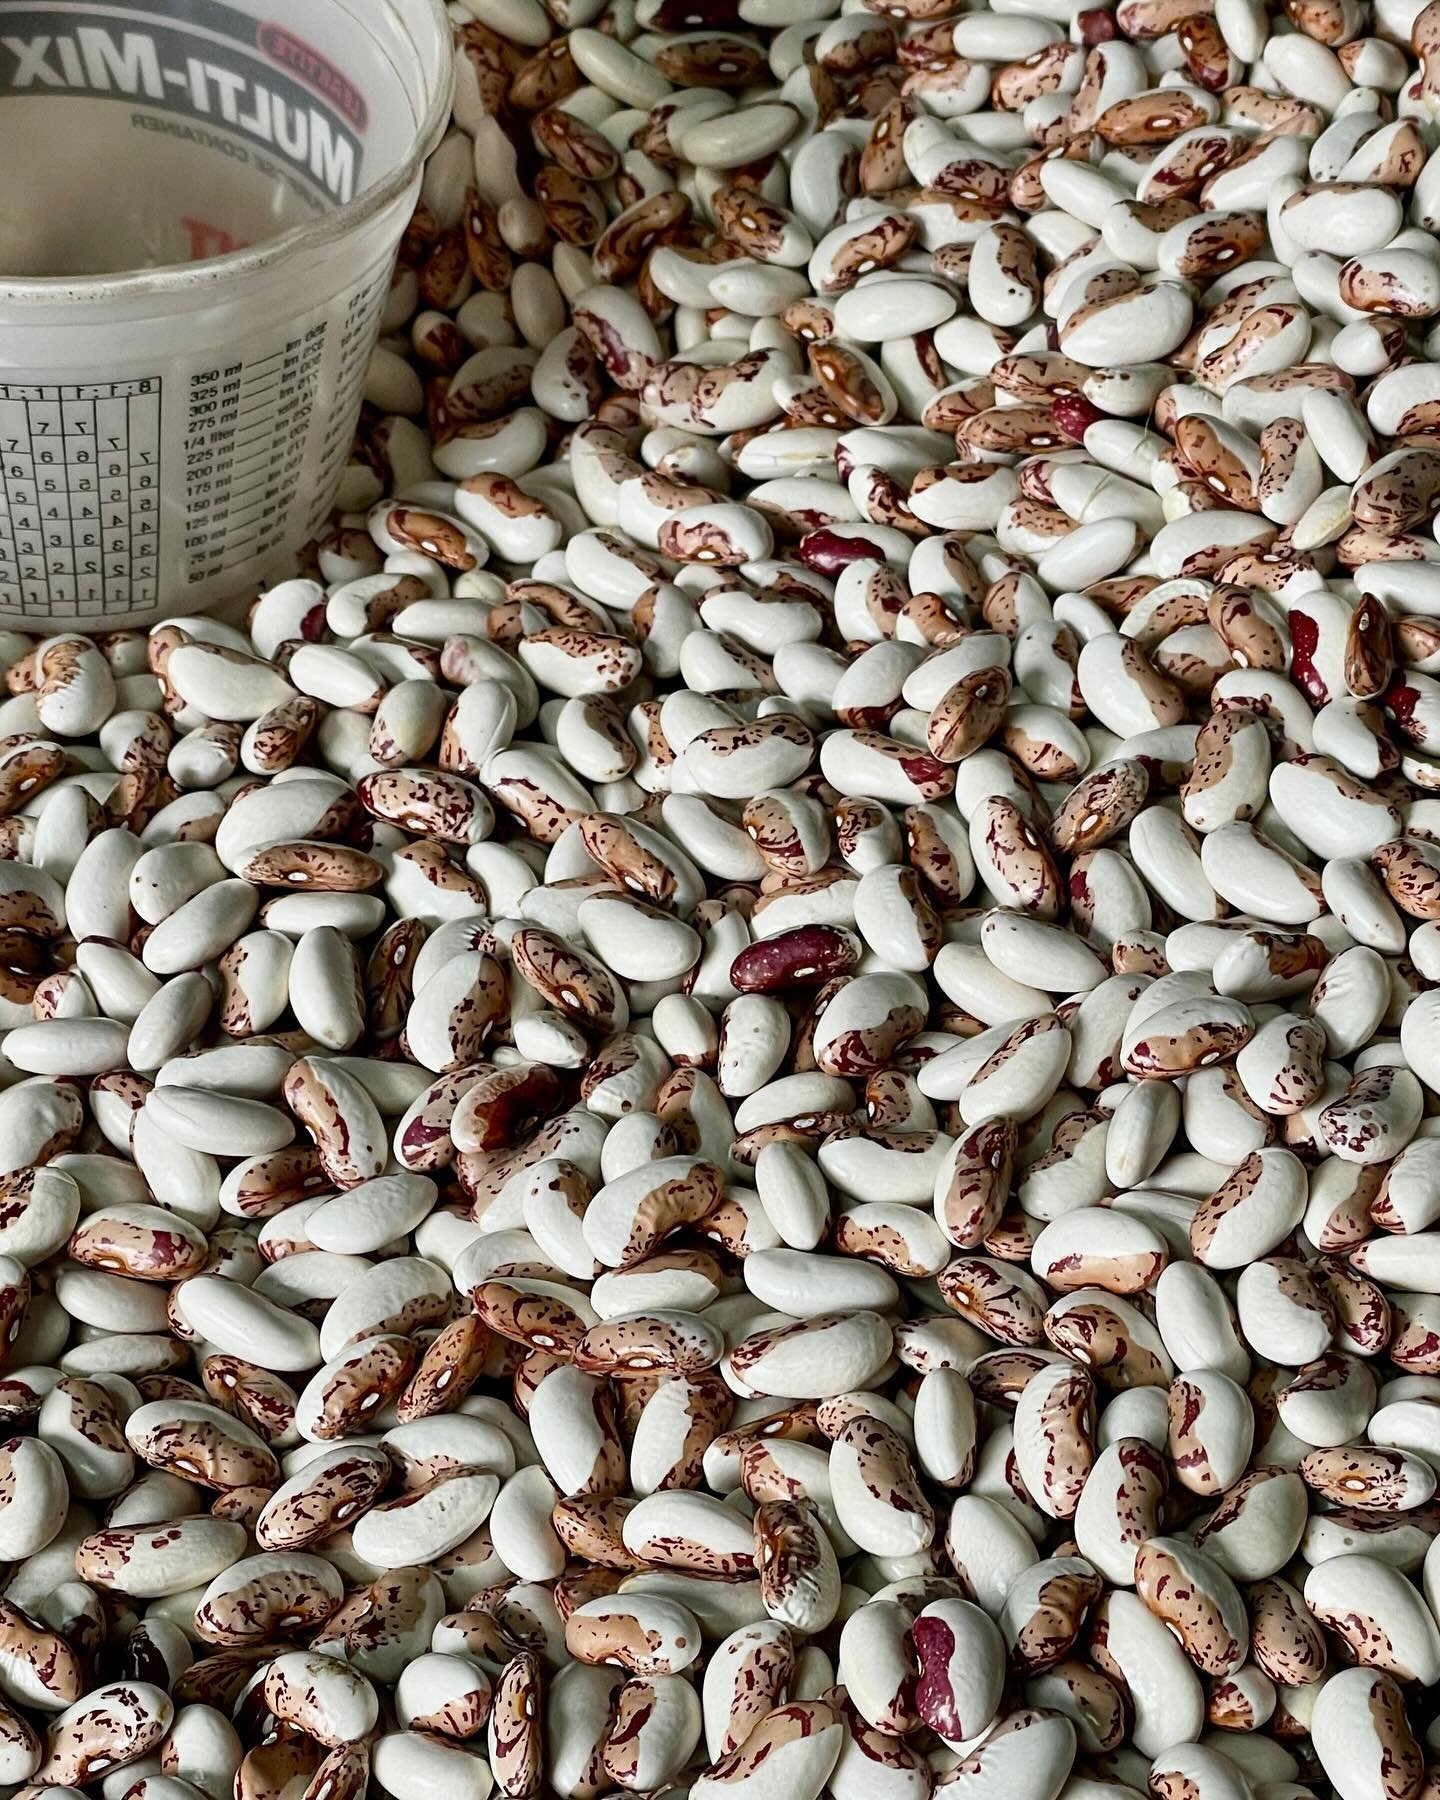 This chilly weather has us craving a warming bowl of beans for dinner.  Shown here are the hearty Snowcap beans right before being weighed and bagged today. What are some of your favorite recipes or meals to make with our heirloom beans?